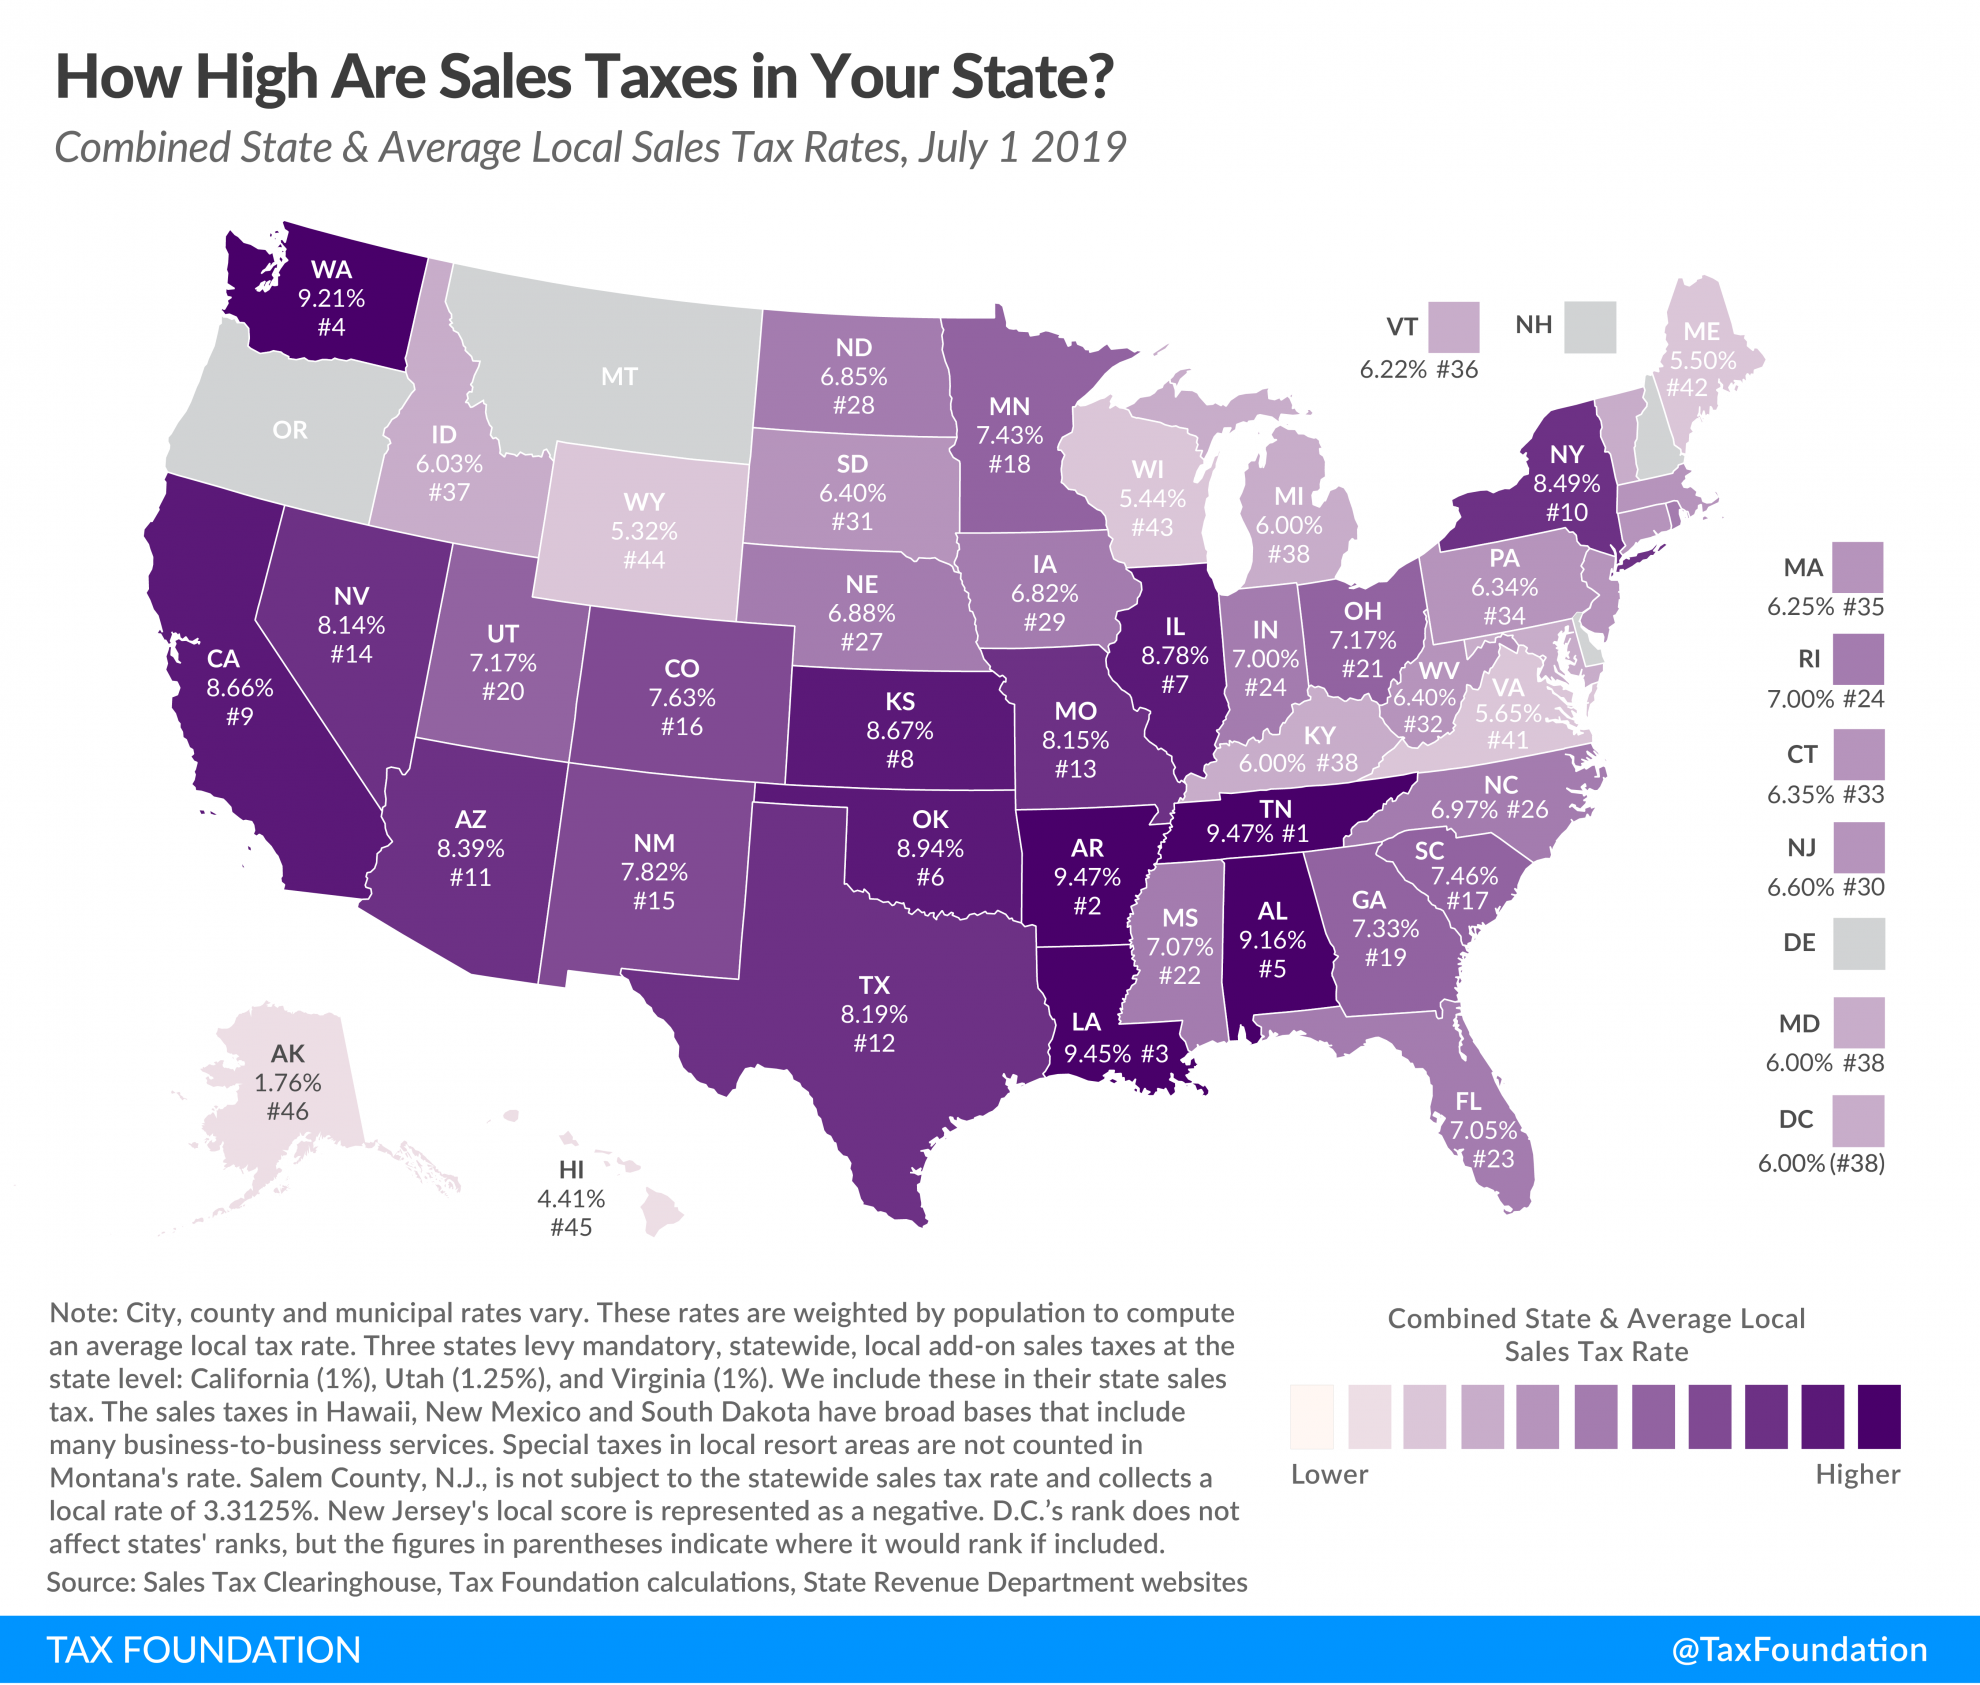 State and Local Sales Tax Rates, Midyear 2019